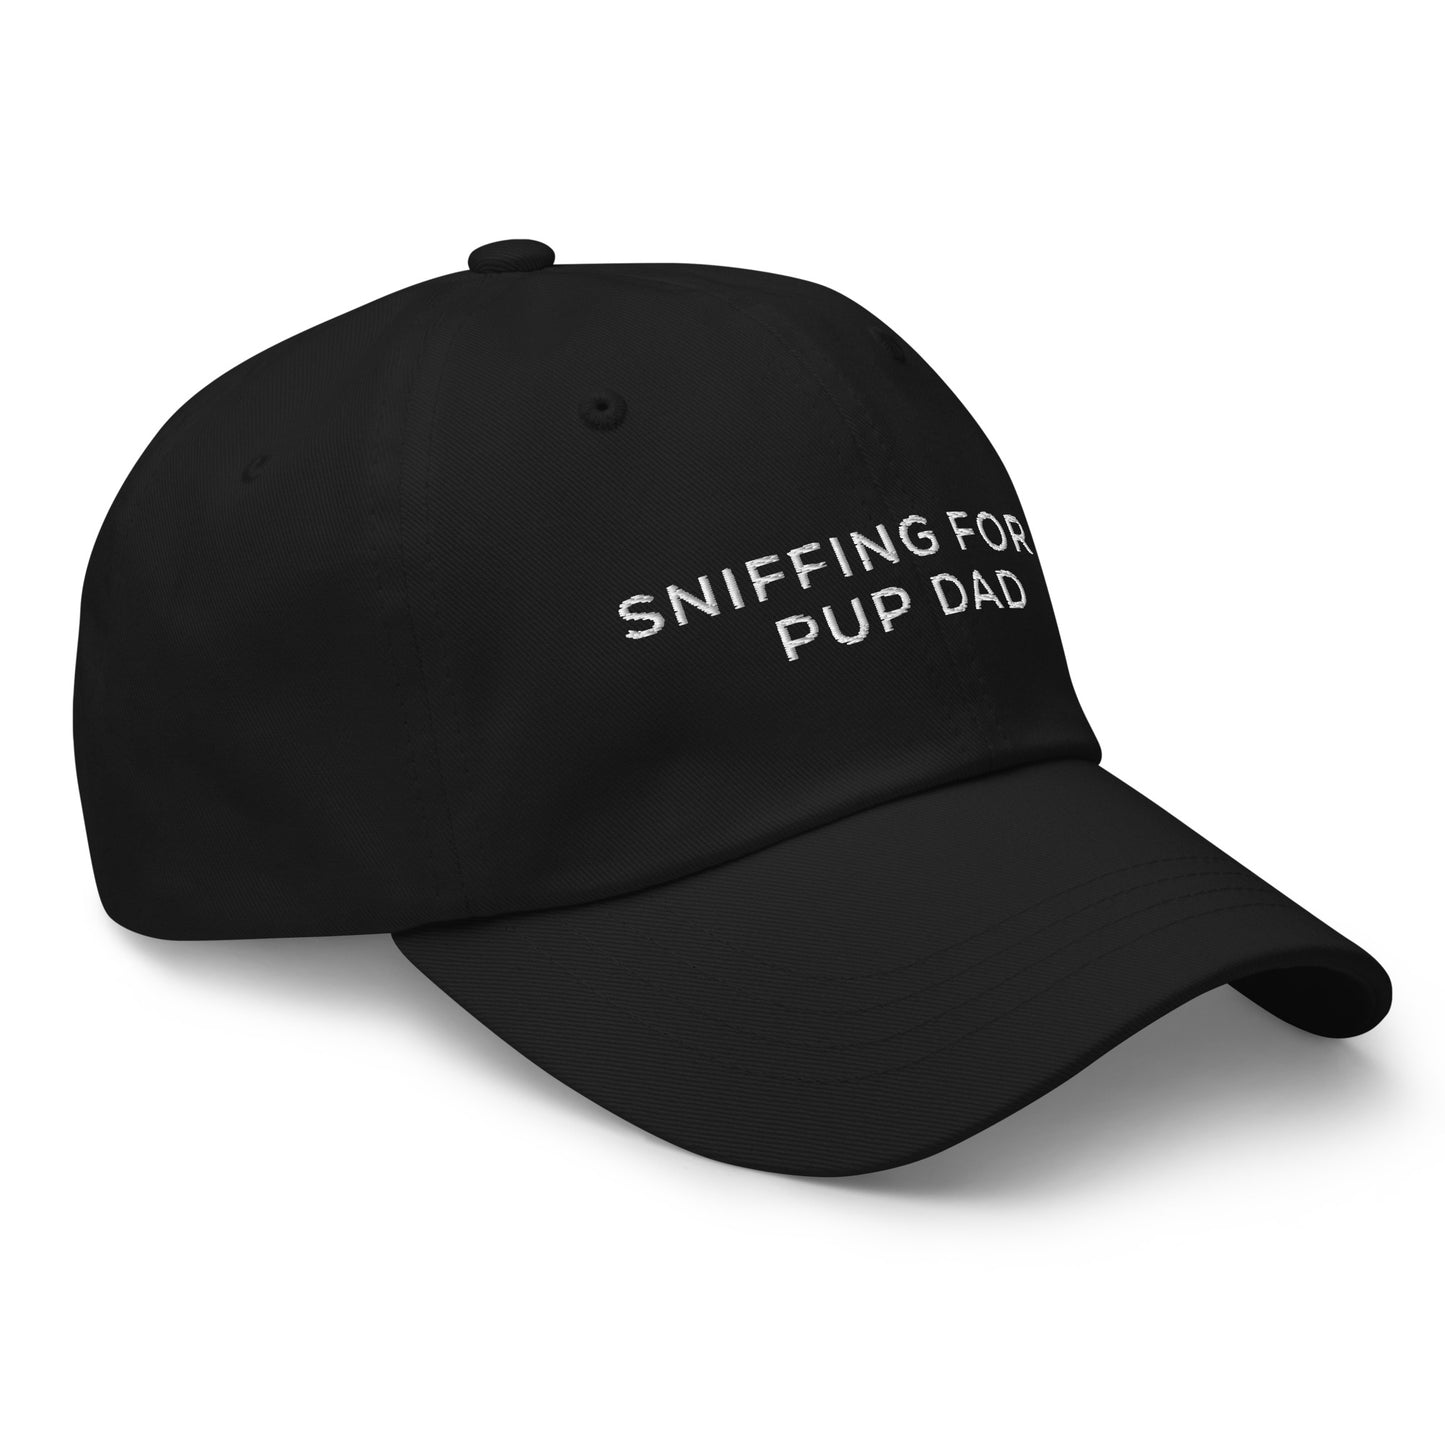 Sniffing for a Pup Dad hat